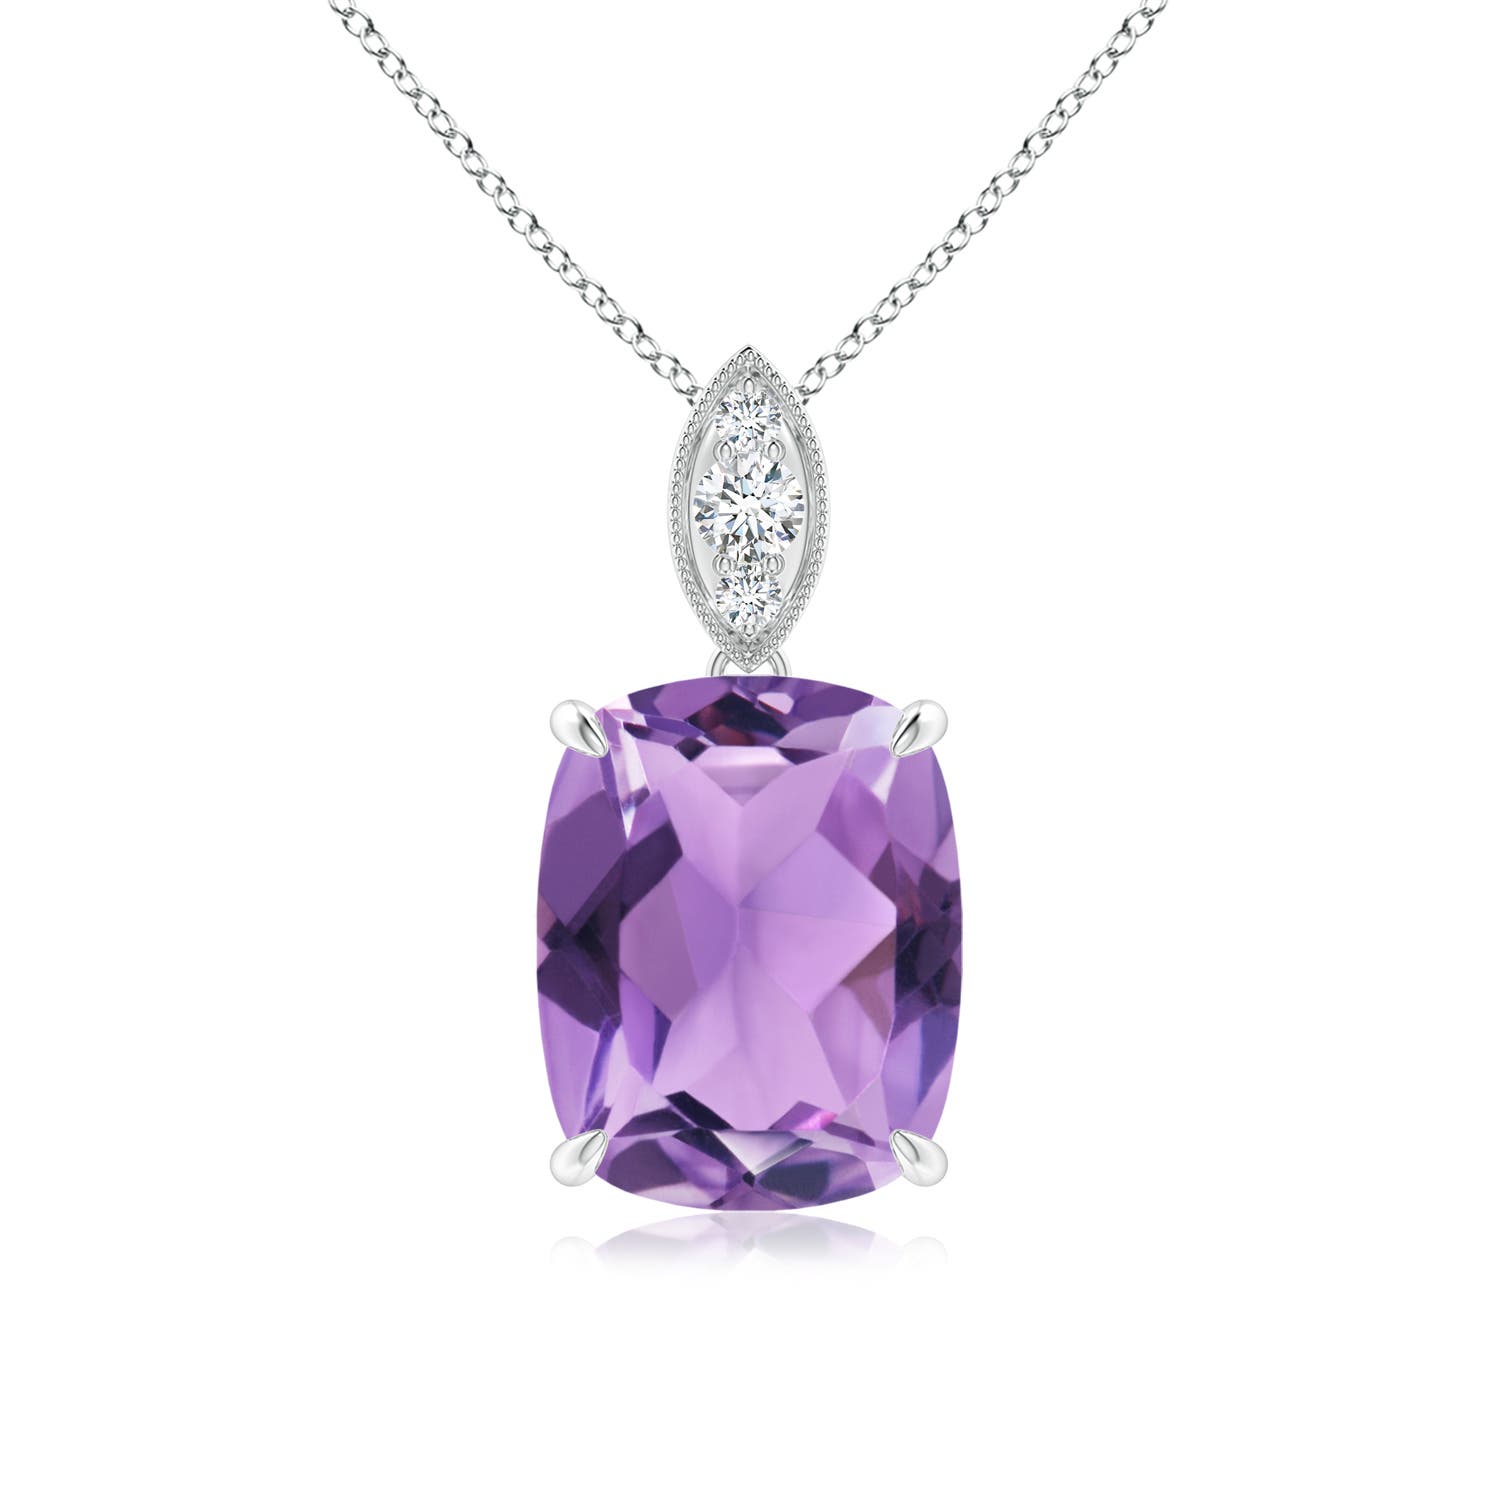 A - Amethyst / 2.75 CT / 14 KT White Gold